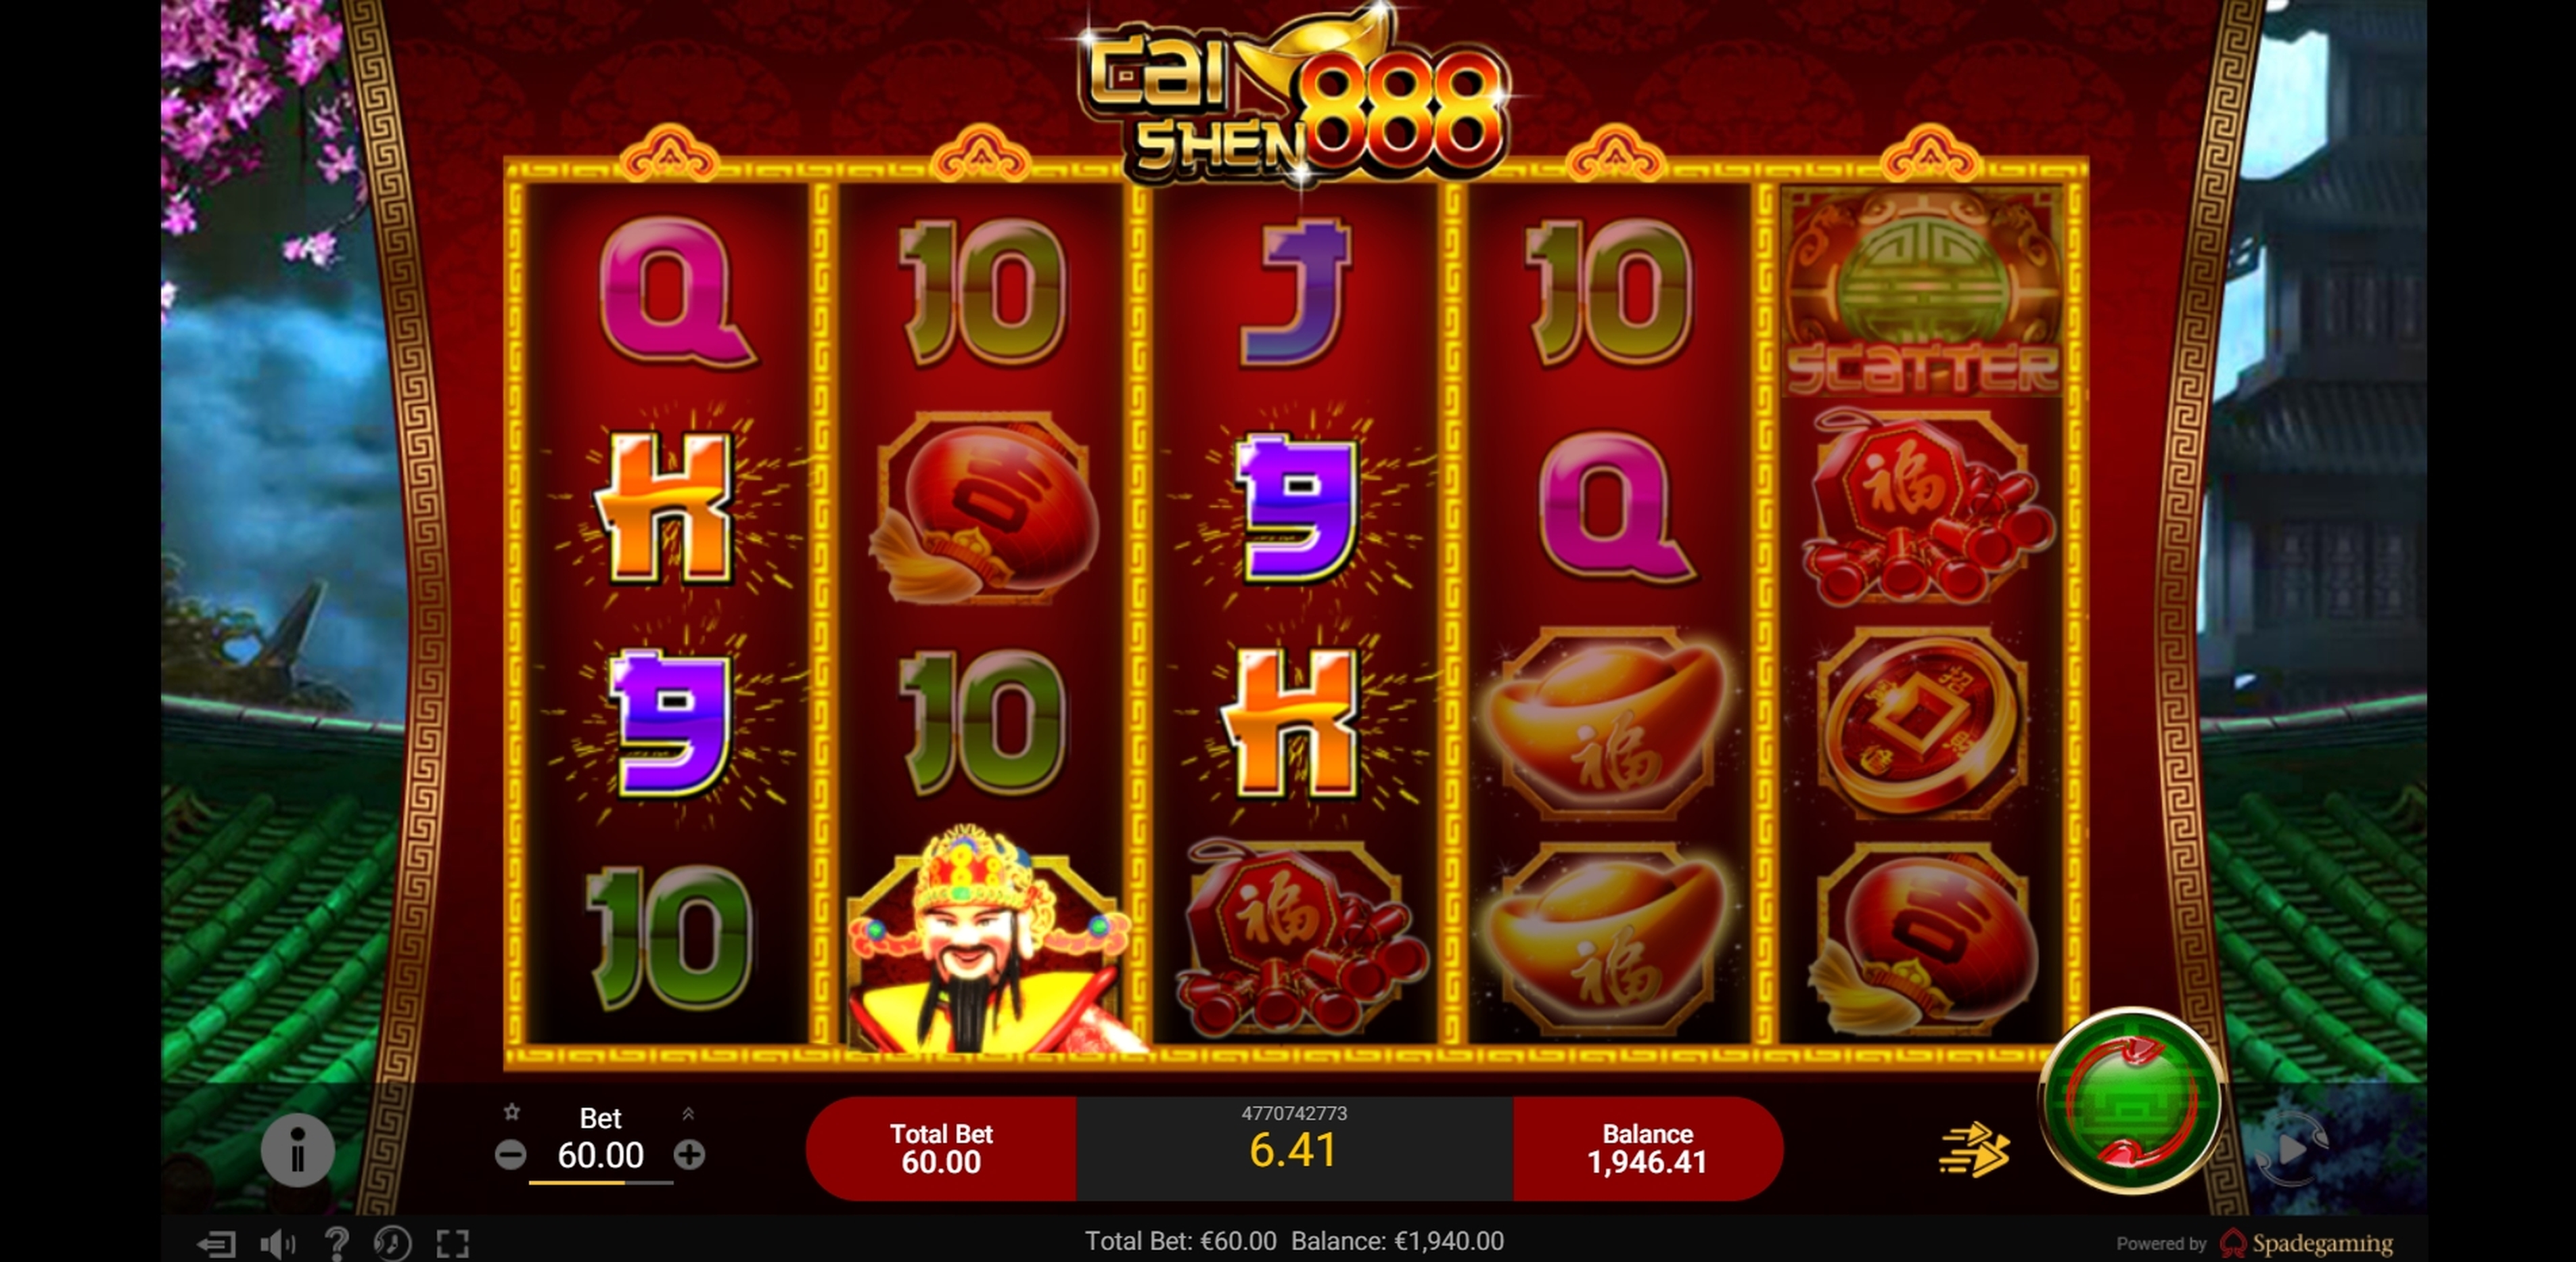 Win Money in Cai Shen 888 Free Slot Game by Spade Gaming